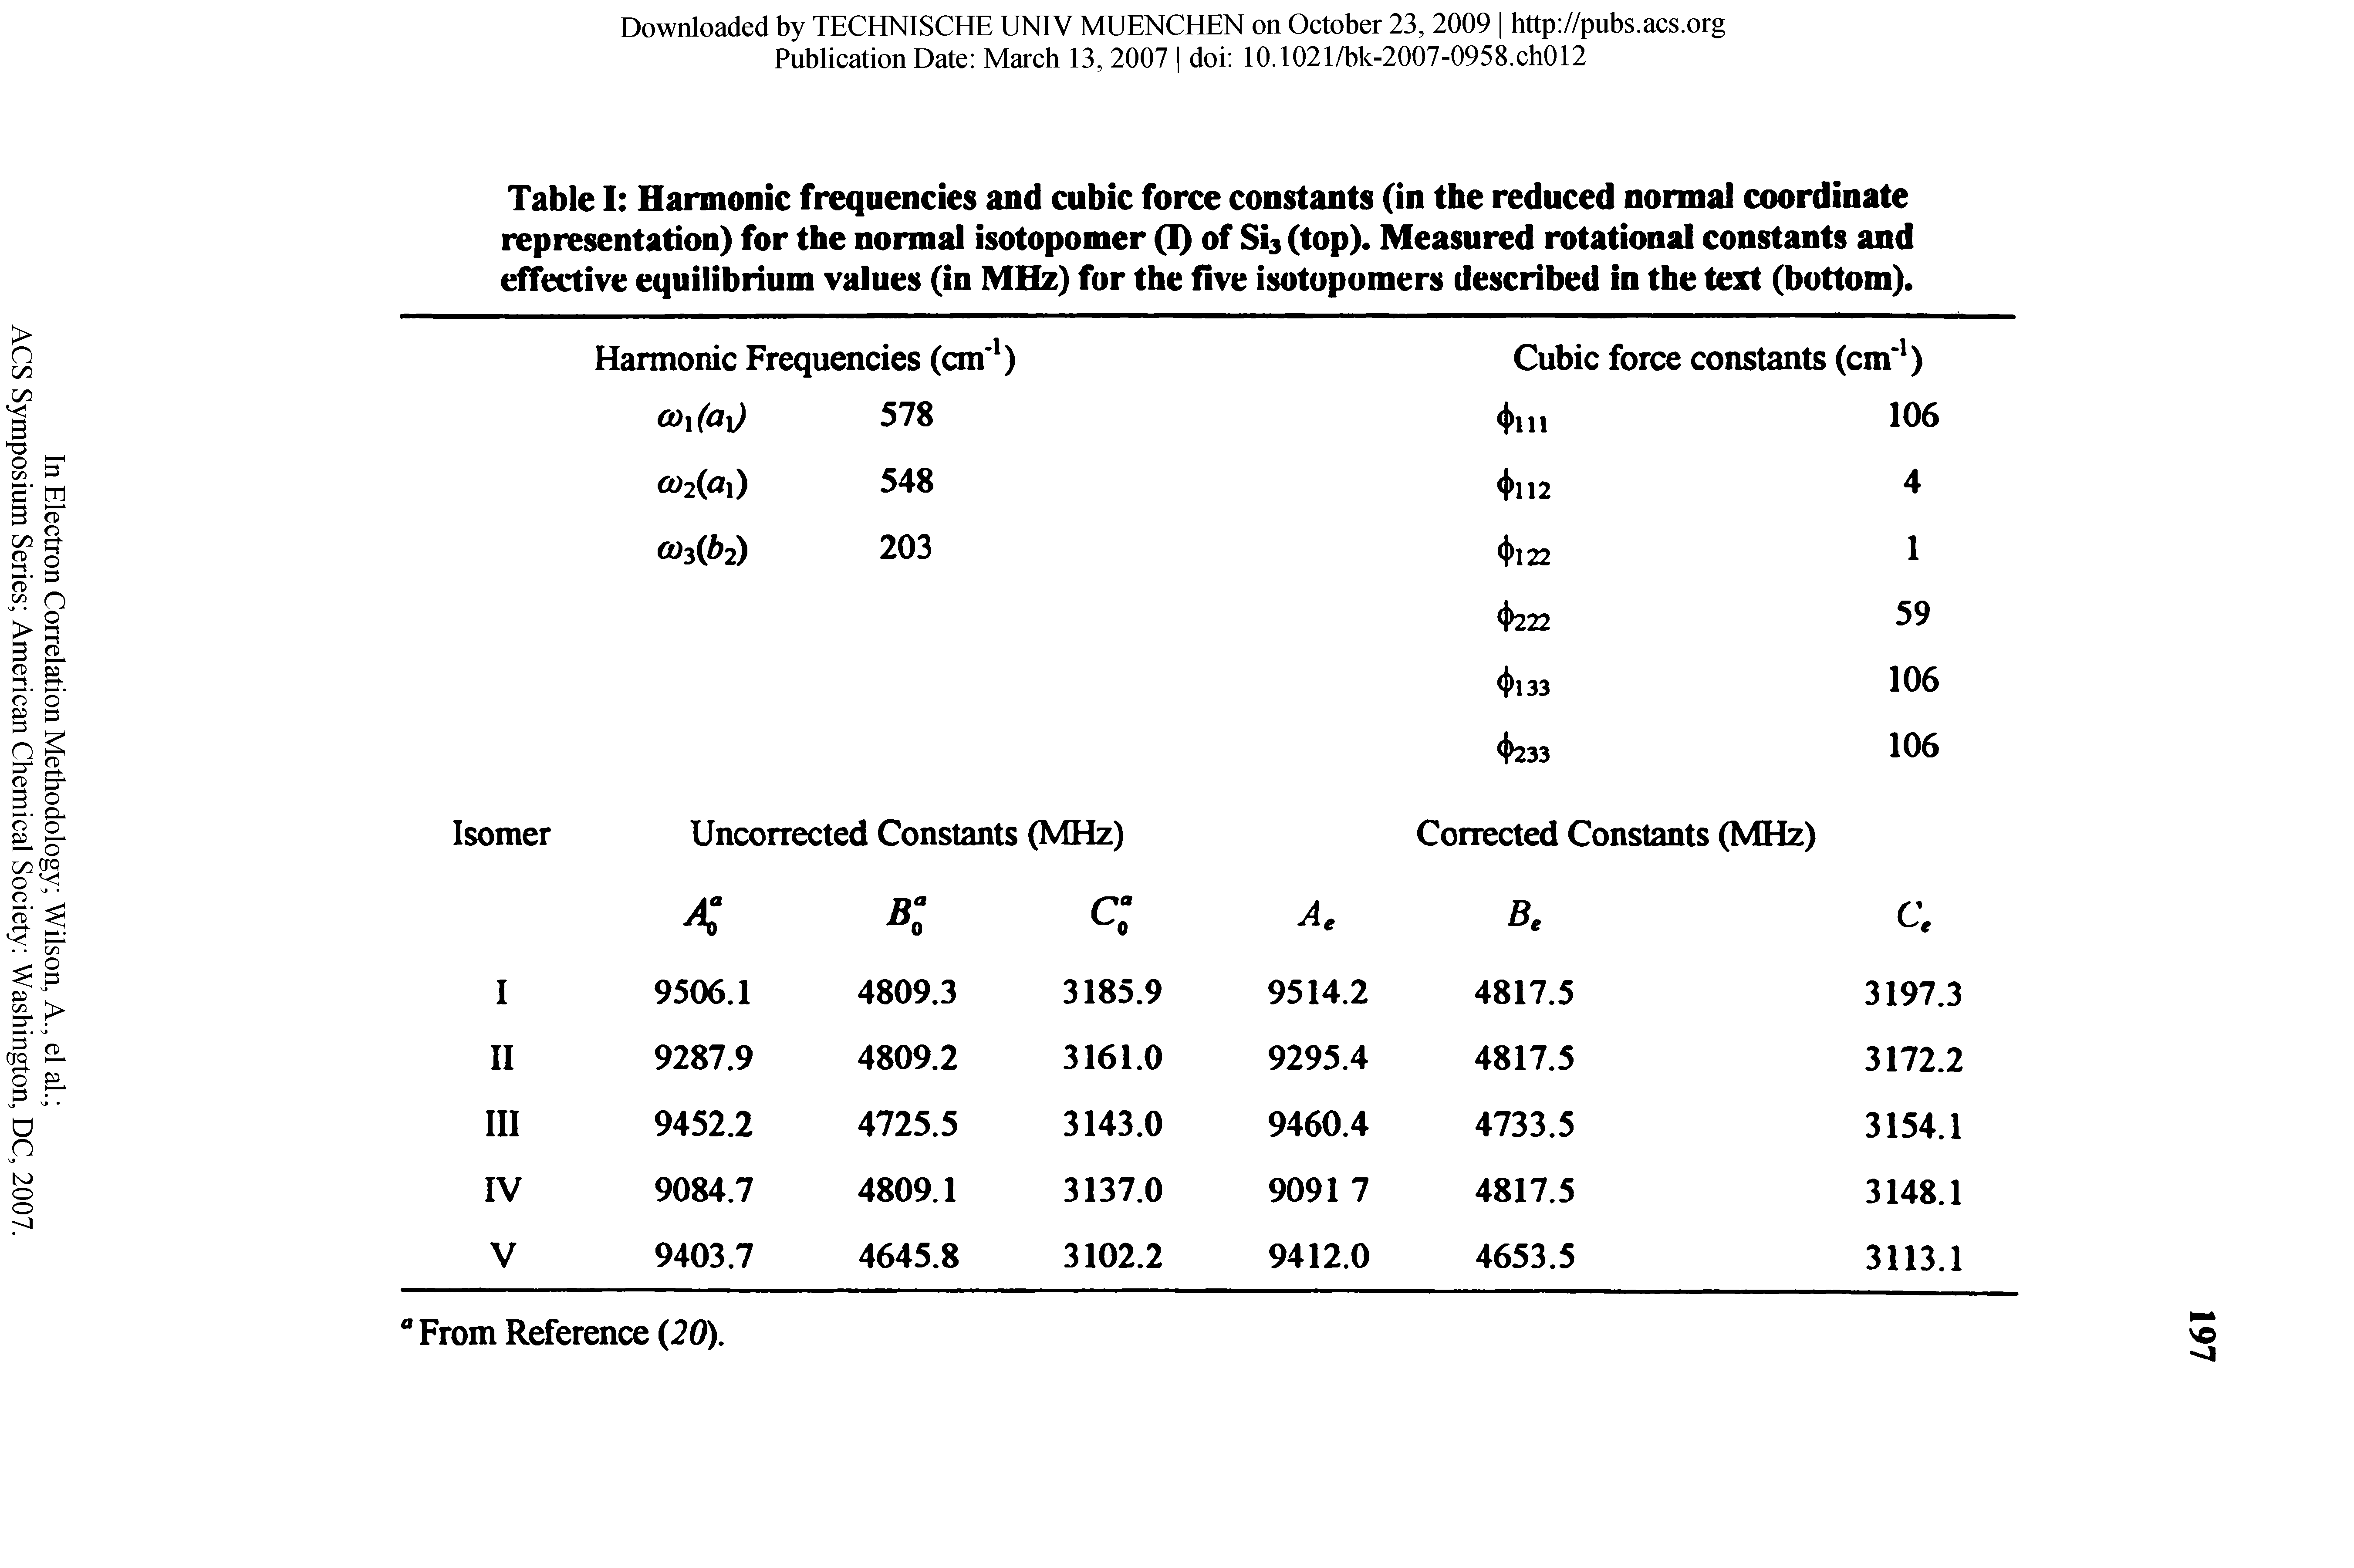 Table I Harmonic frequencies and cubic force constants (in the reduced normal coordinate representation) for the normal isotopomer (1) of Sij (top). Measured rotational constants and effective equilibrium values (in MHz) for the five isotopomers described in the text (bottom).